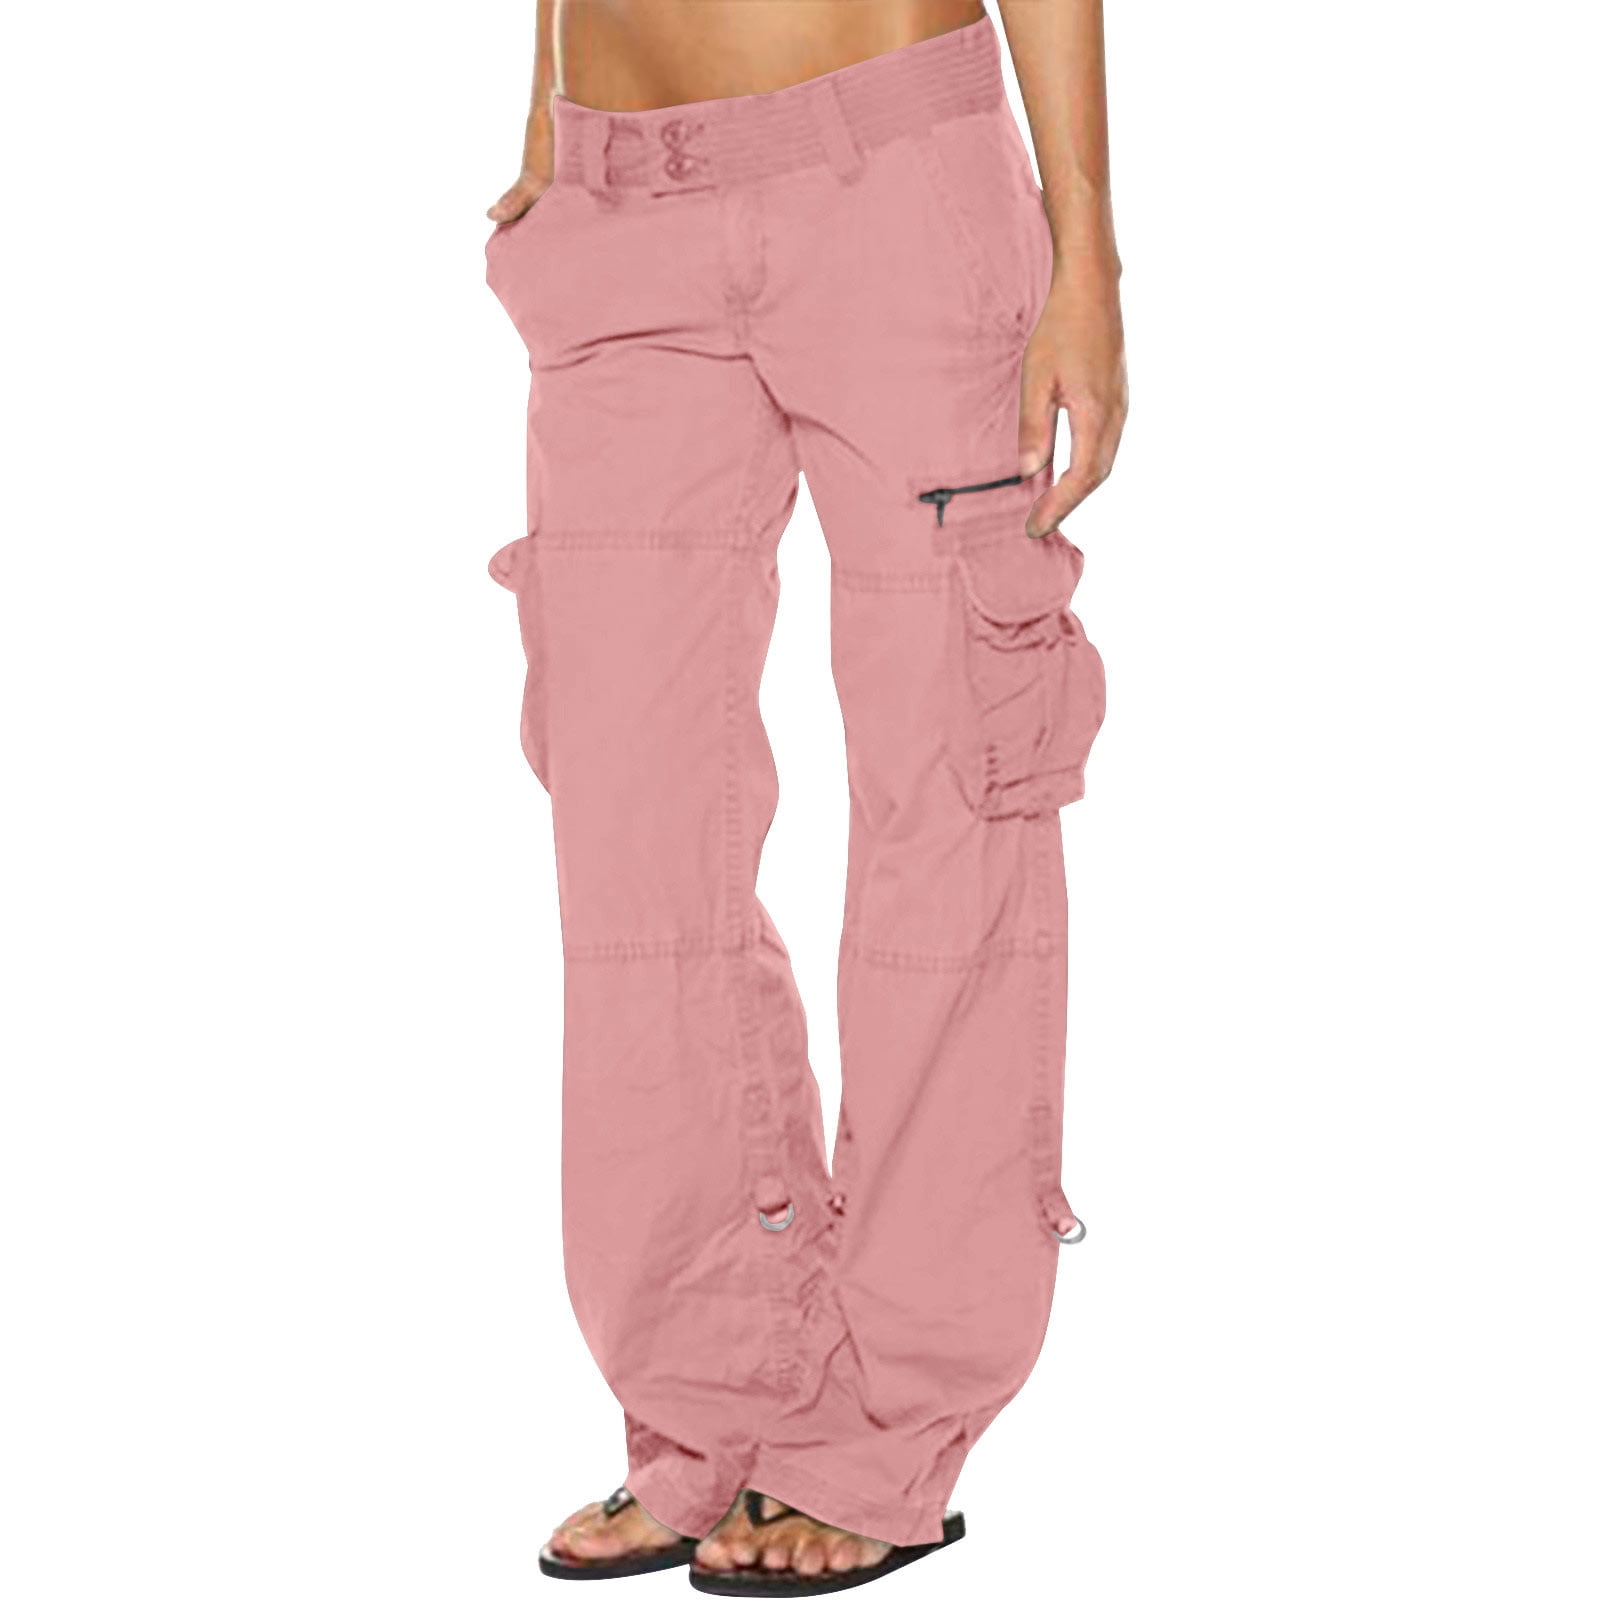 Solid Pink Pants- Comfort Fit – Sandlore Clothing And Lifle